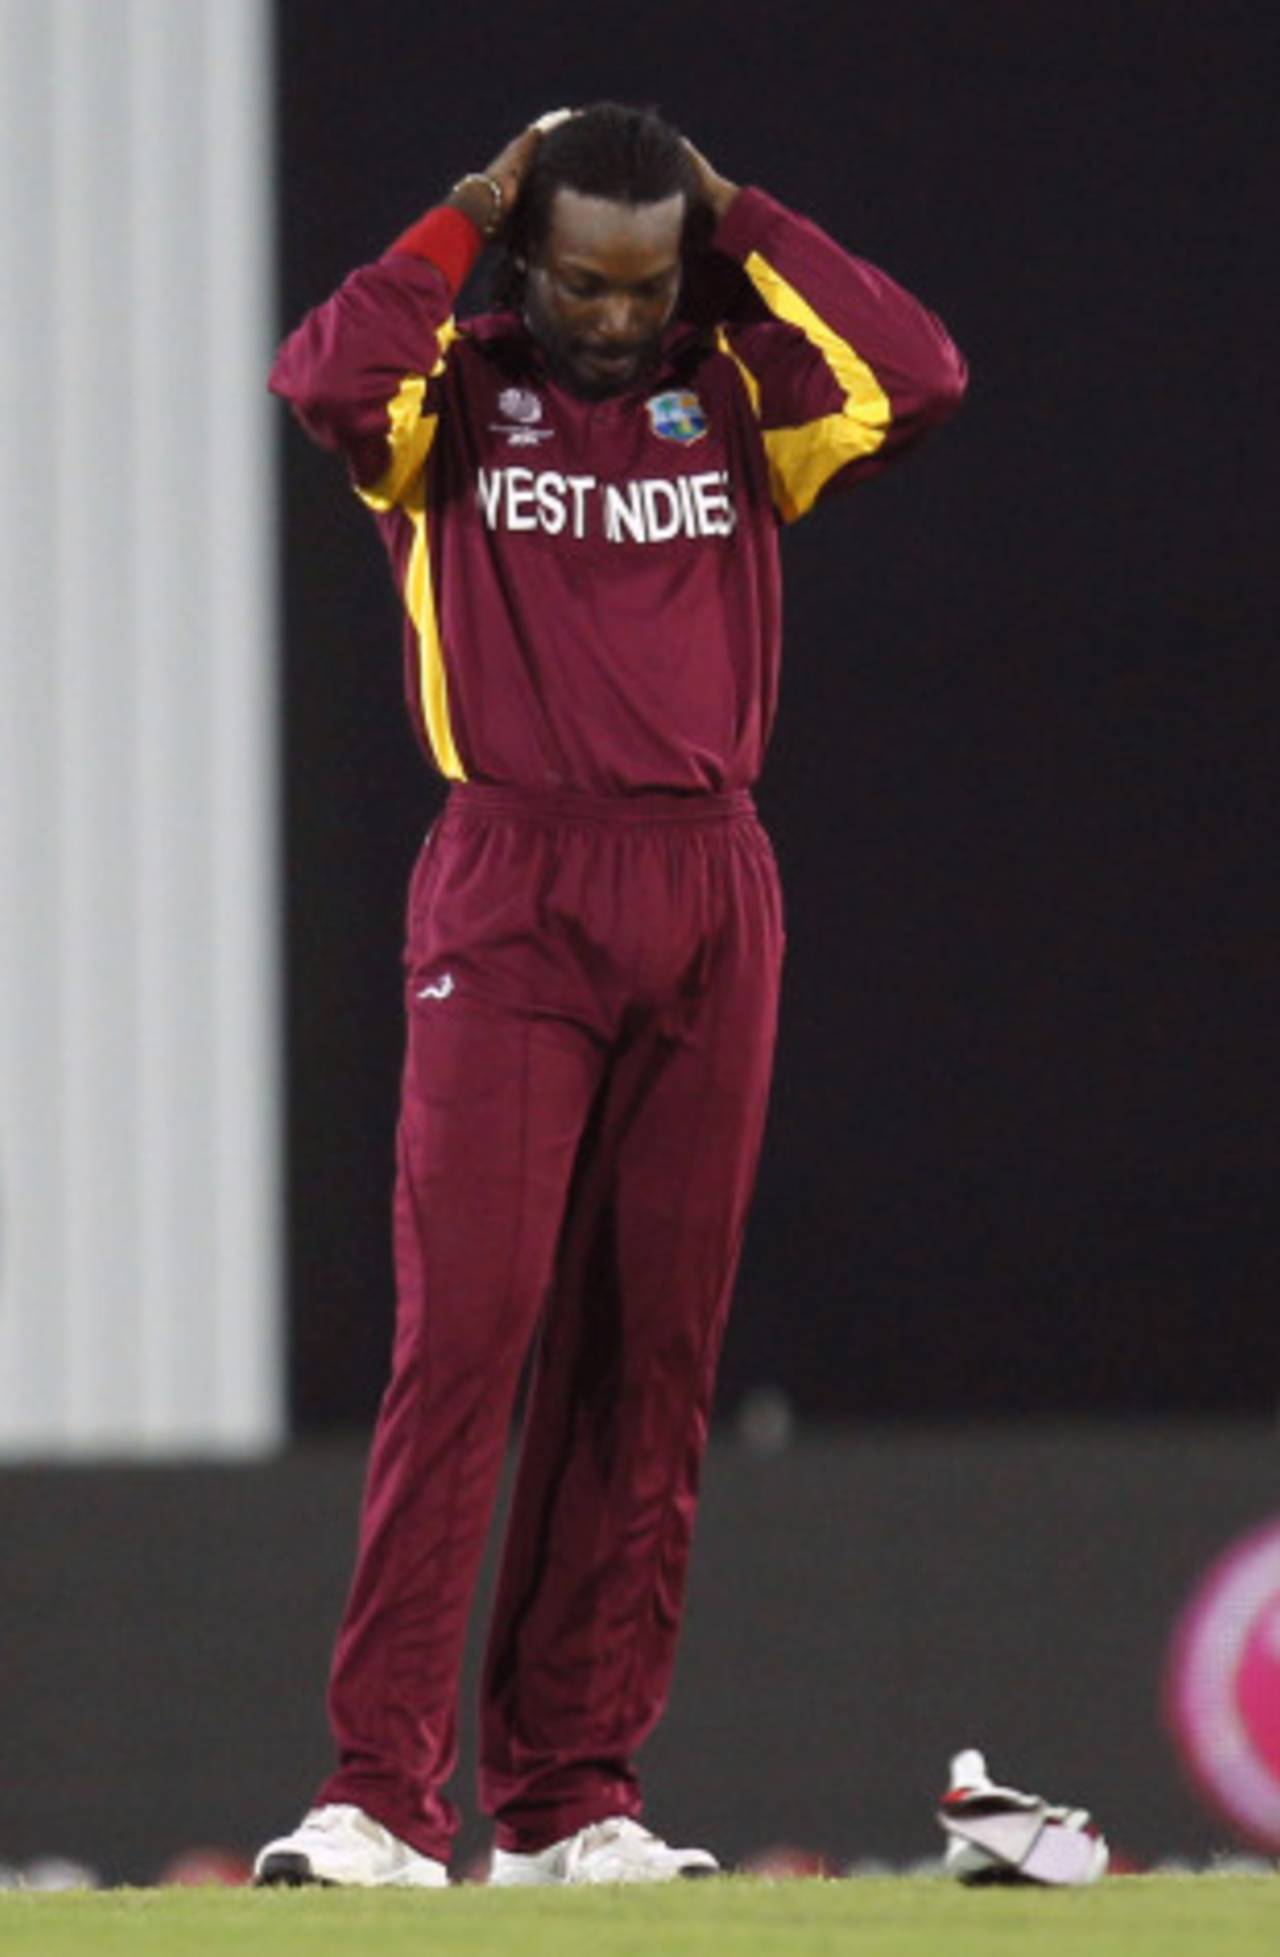 Chris Gayle looks down in dismay during West Indies' loss, West Indies v Pakistan, 1st quarter-final, World Cup 2011, March 23, 2011